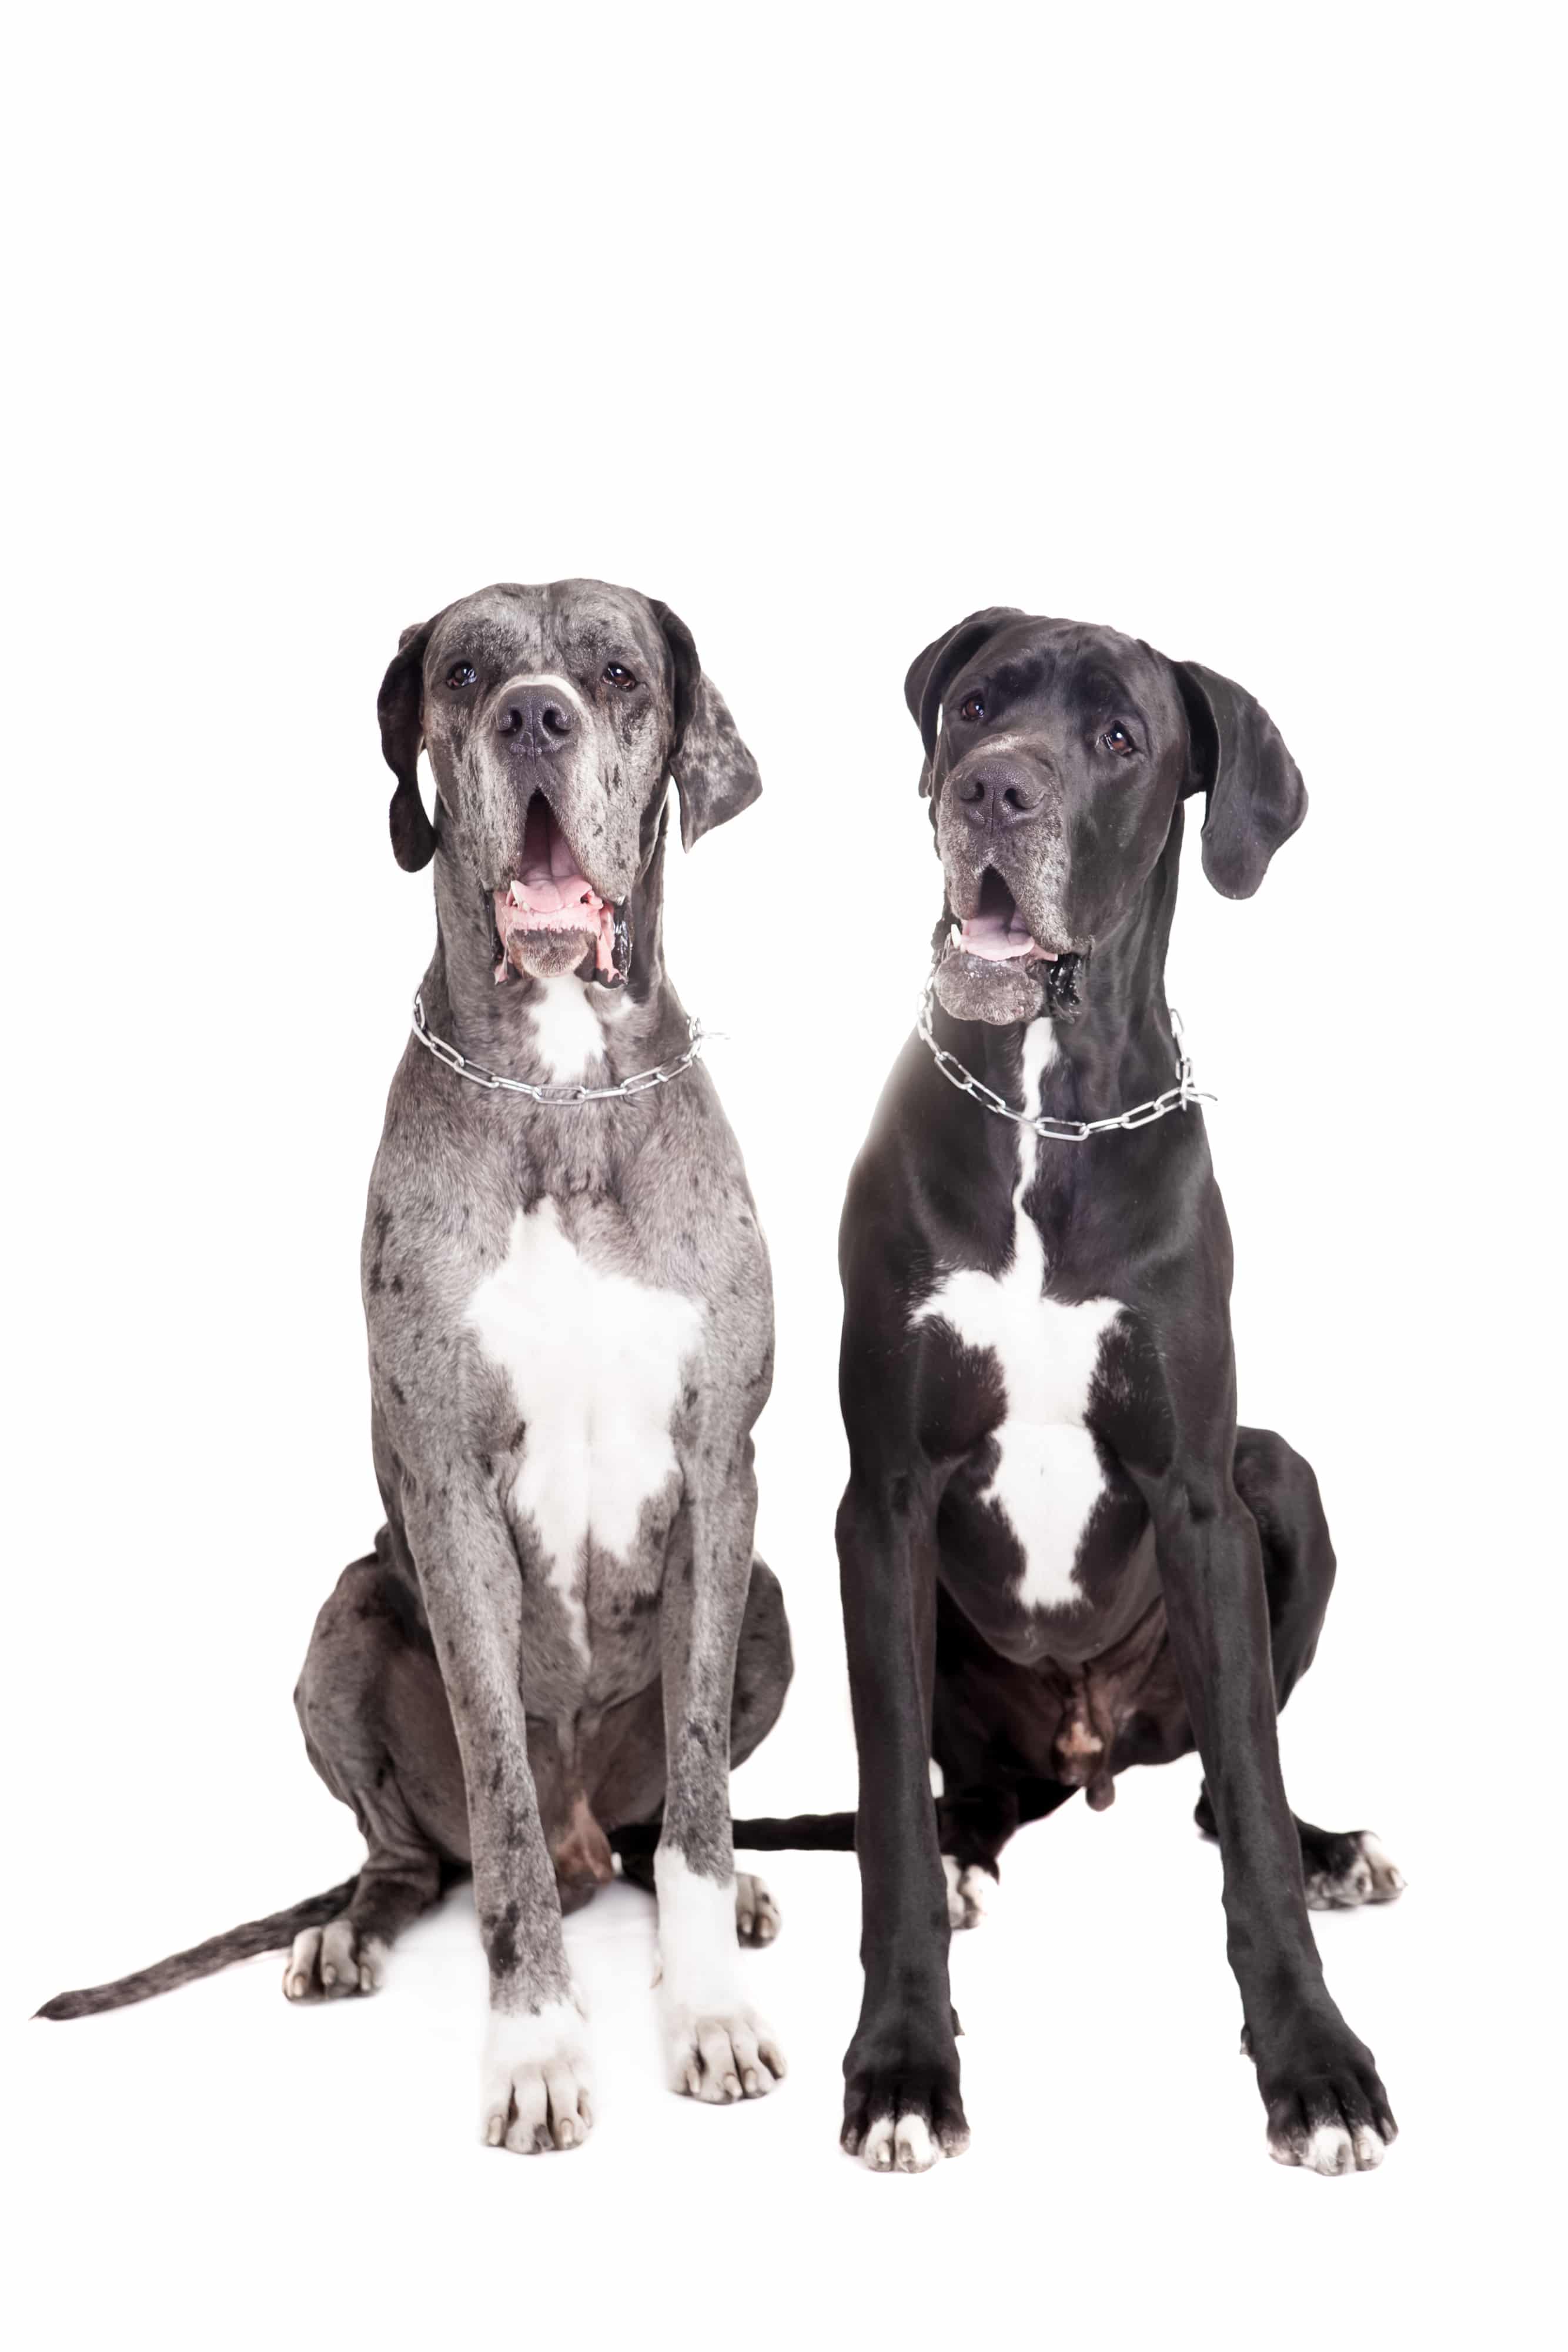 Two great Dane dogs on front of a white background